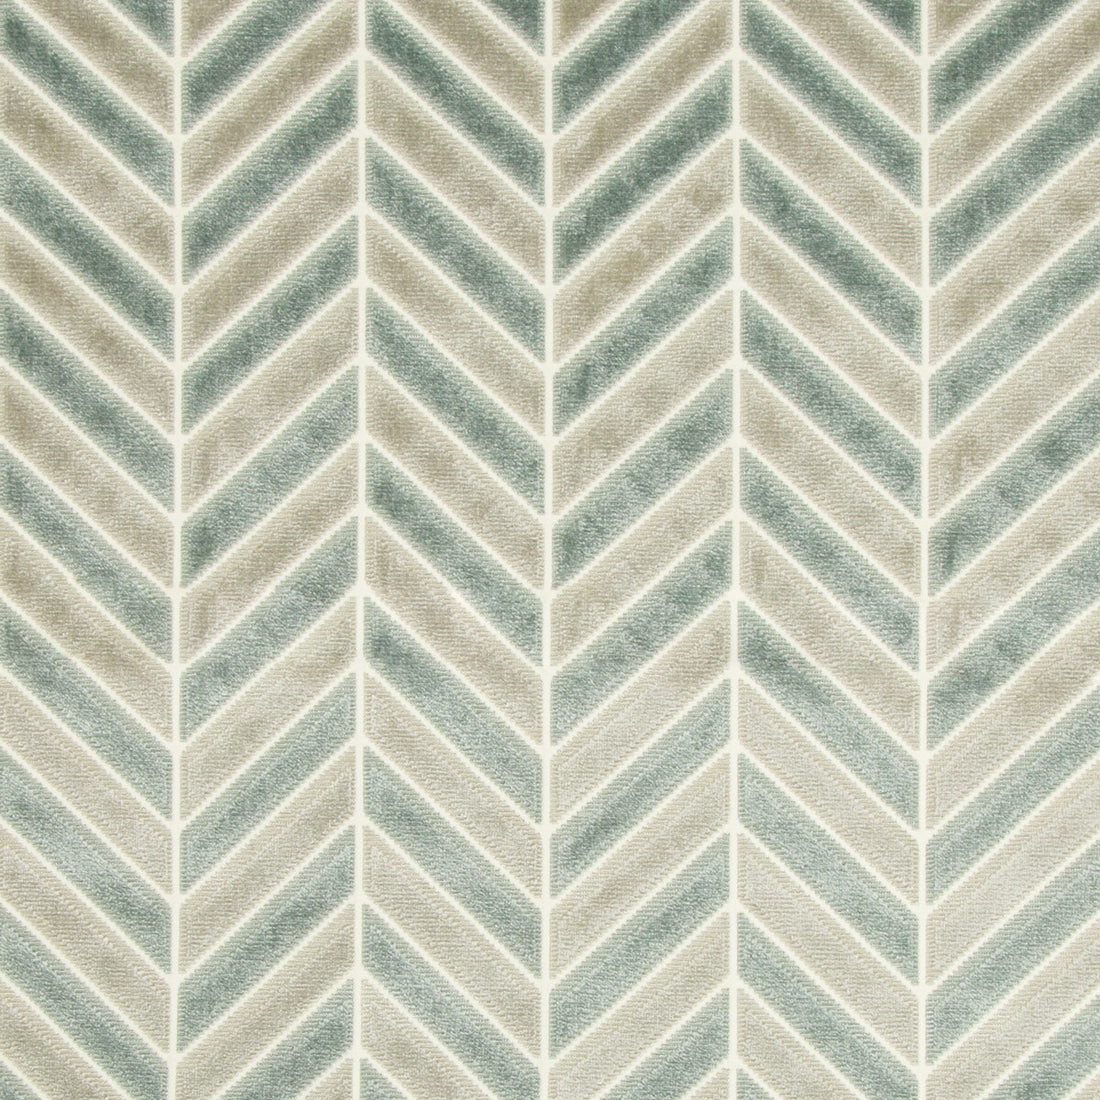 Pinnacle Velvet fabric in mineral color - pattern 34779.511.0 - by Kravet Couture in the Artisan Velvets collection